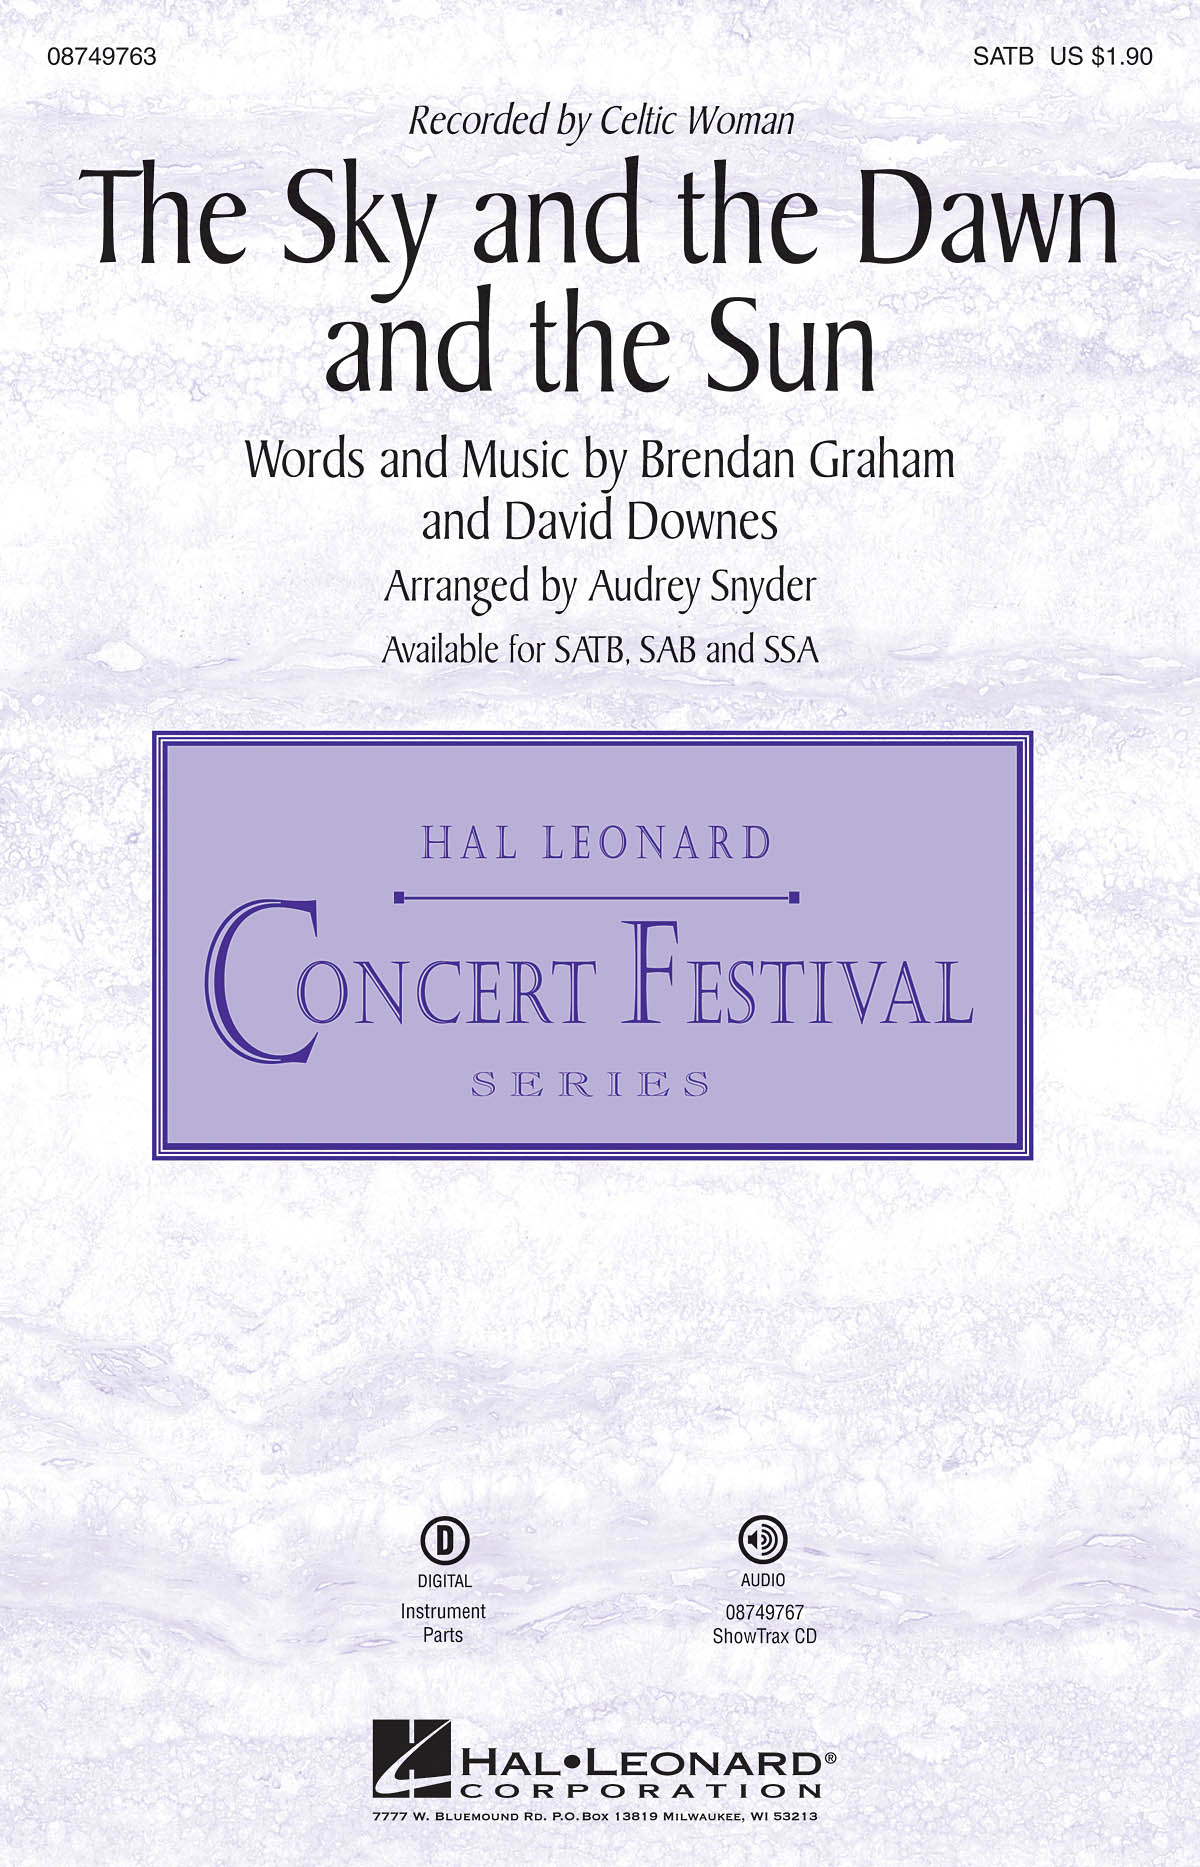 Brendan Graham: The Sky and the Dawn and the Sun: SATB: Vocal Score